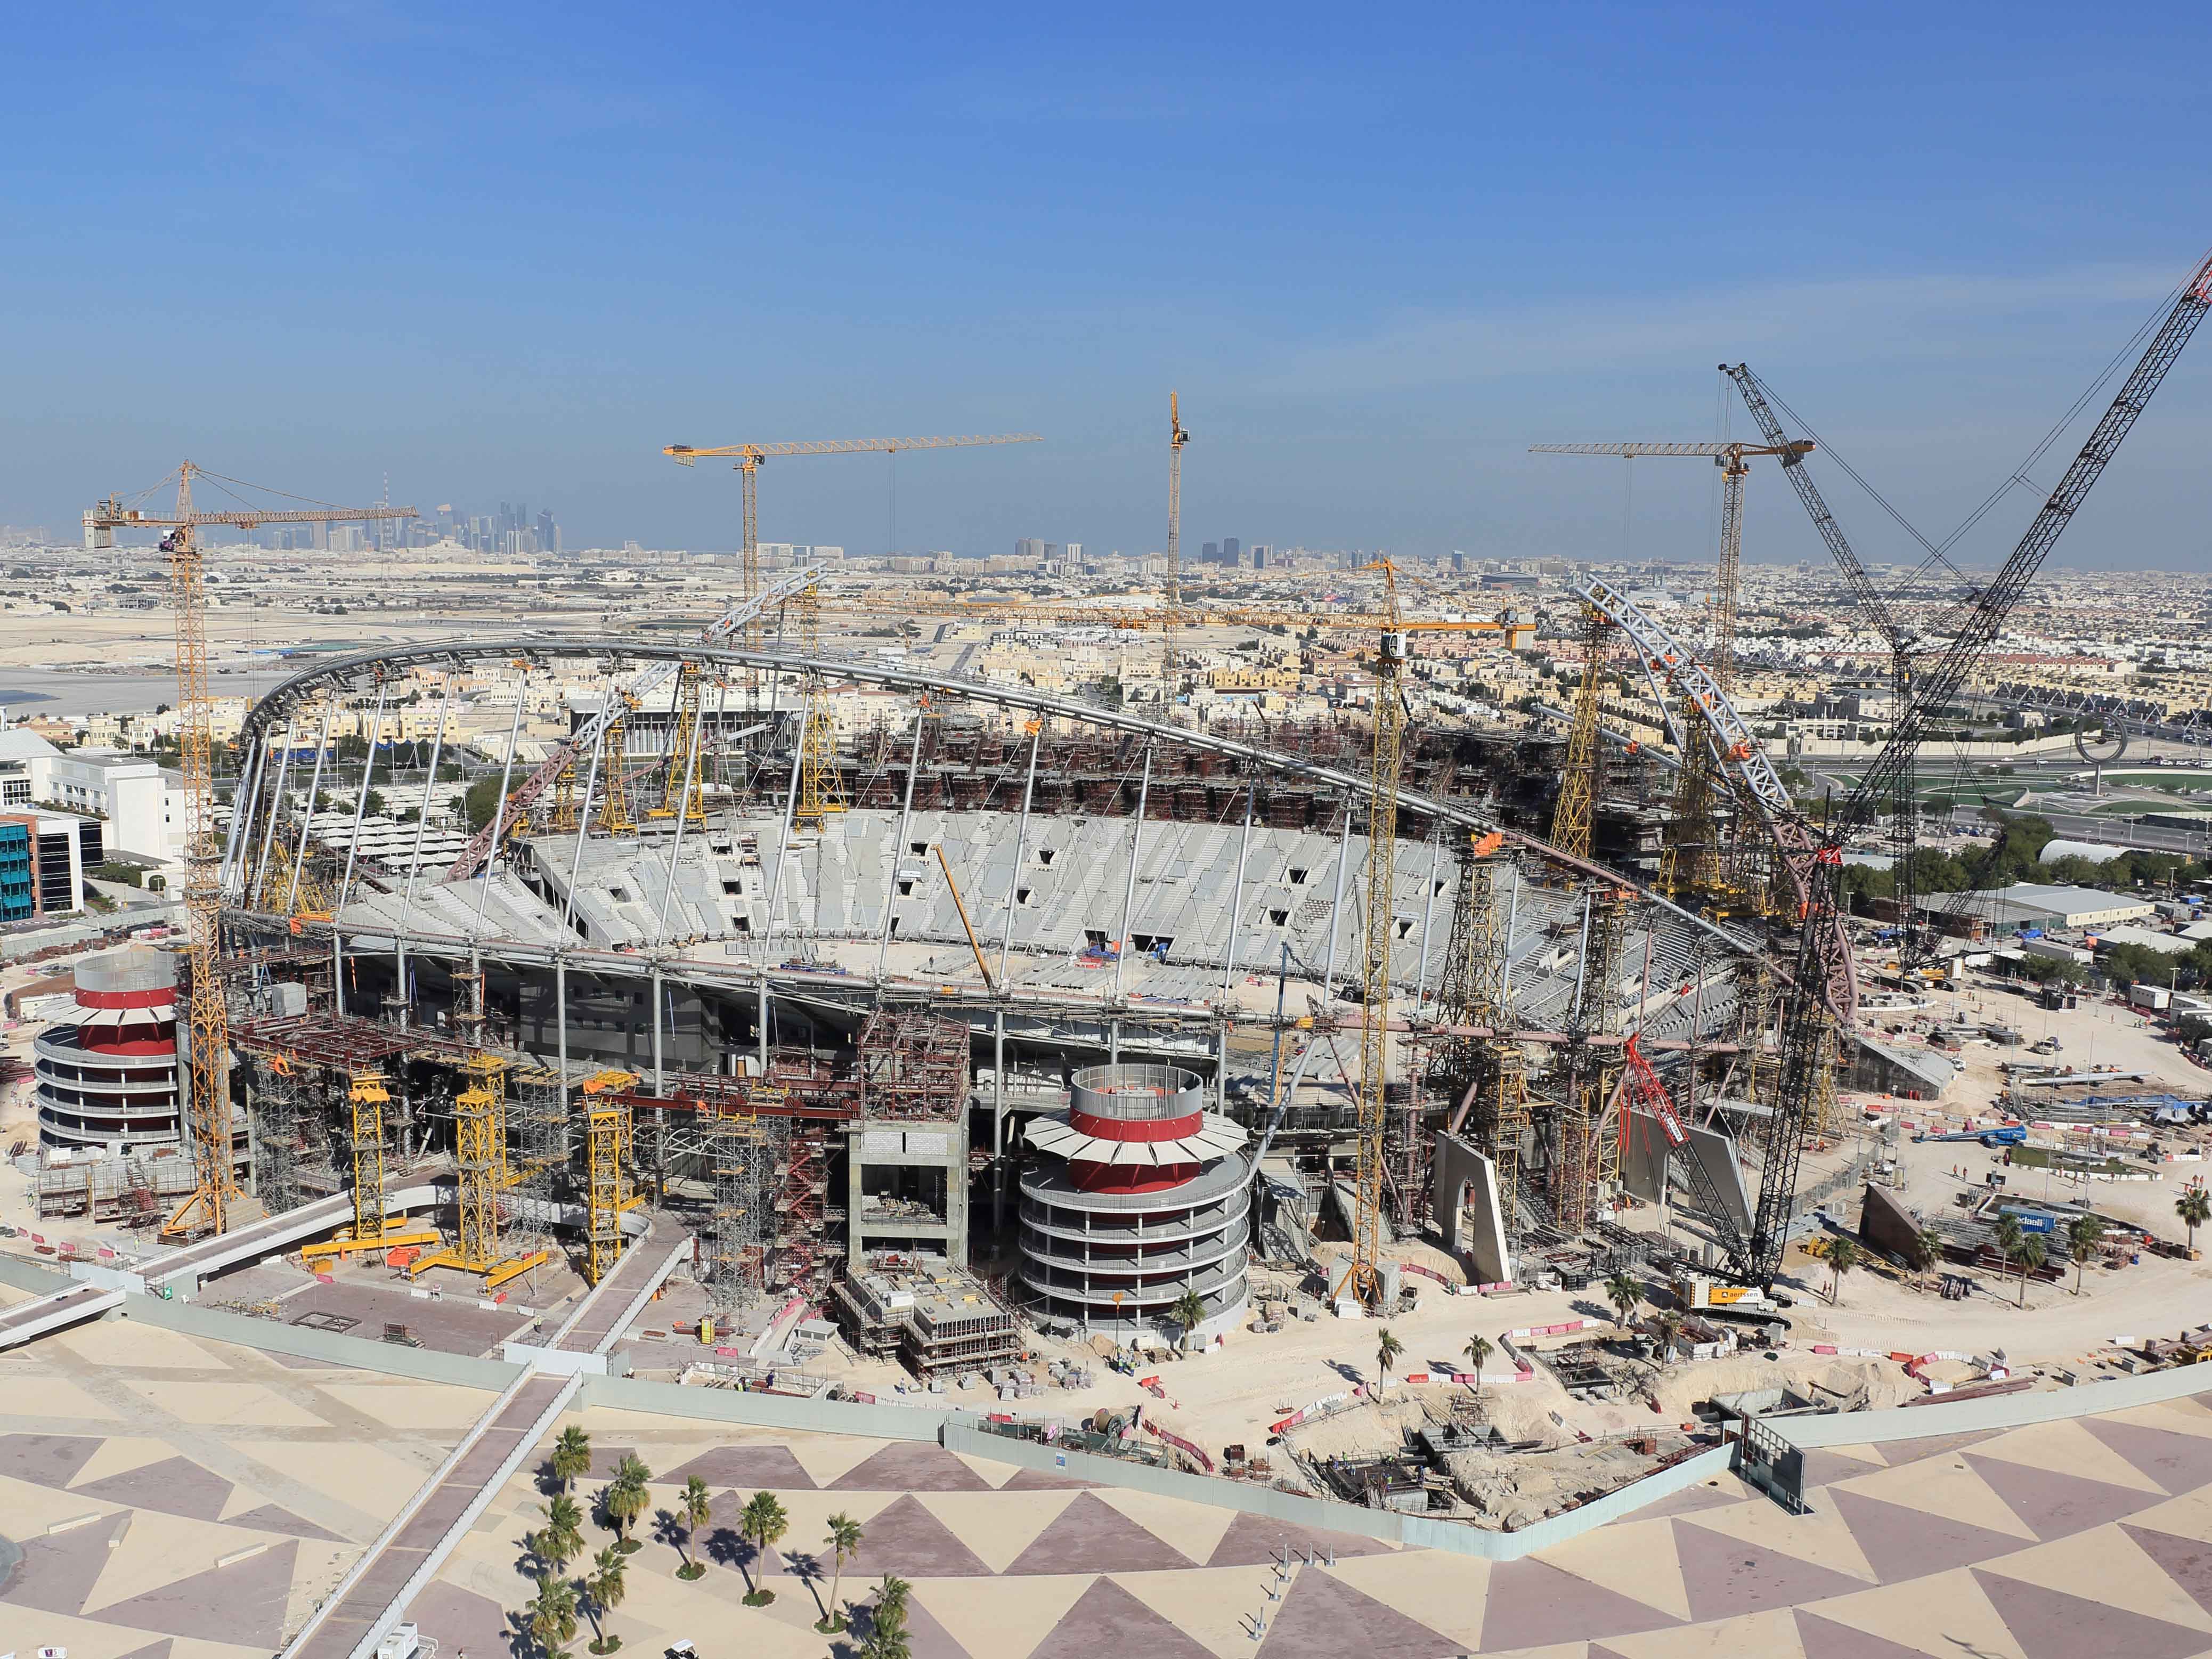 Khalifa International Stadium, also known as National Stadium, being redeveloped in preparation for hosting the 2022 Qatar World Cup